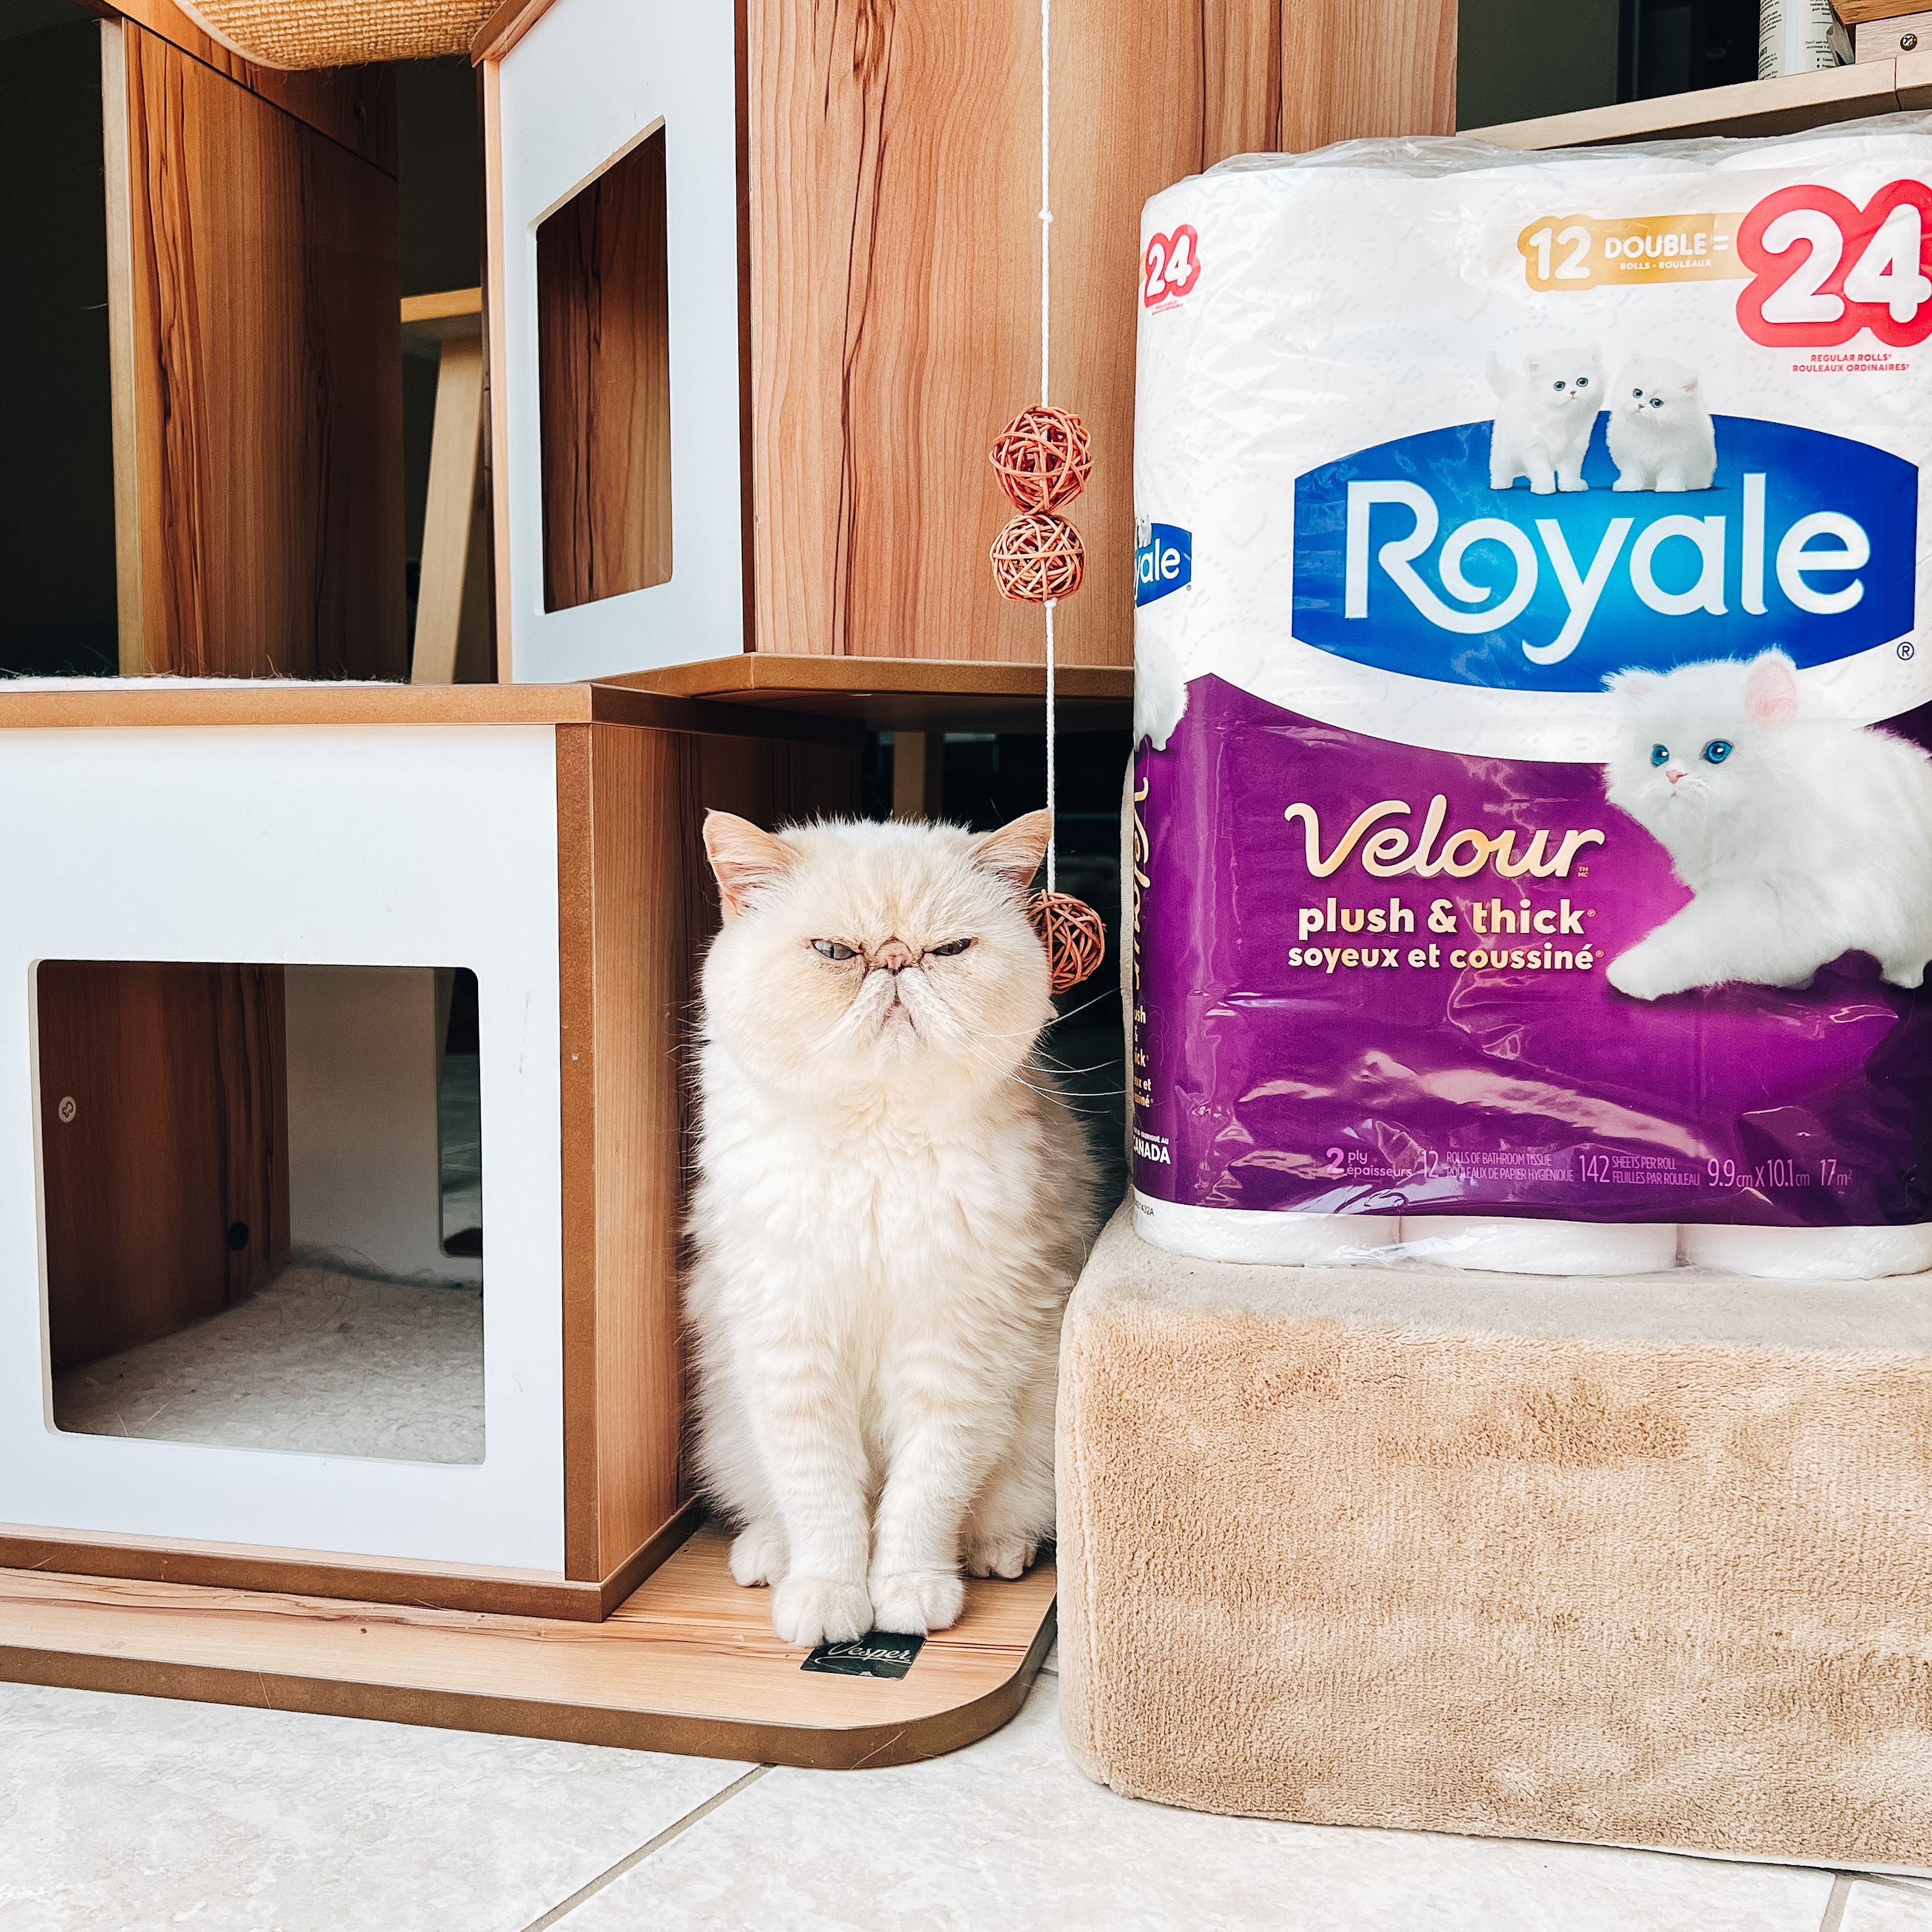 Royale campaign with Chubbz (my cat)